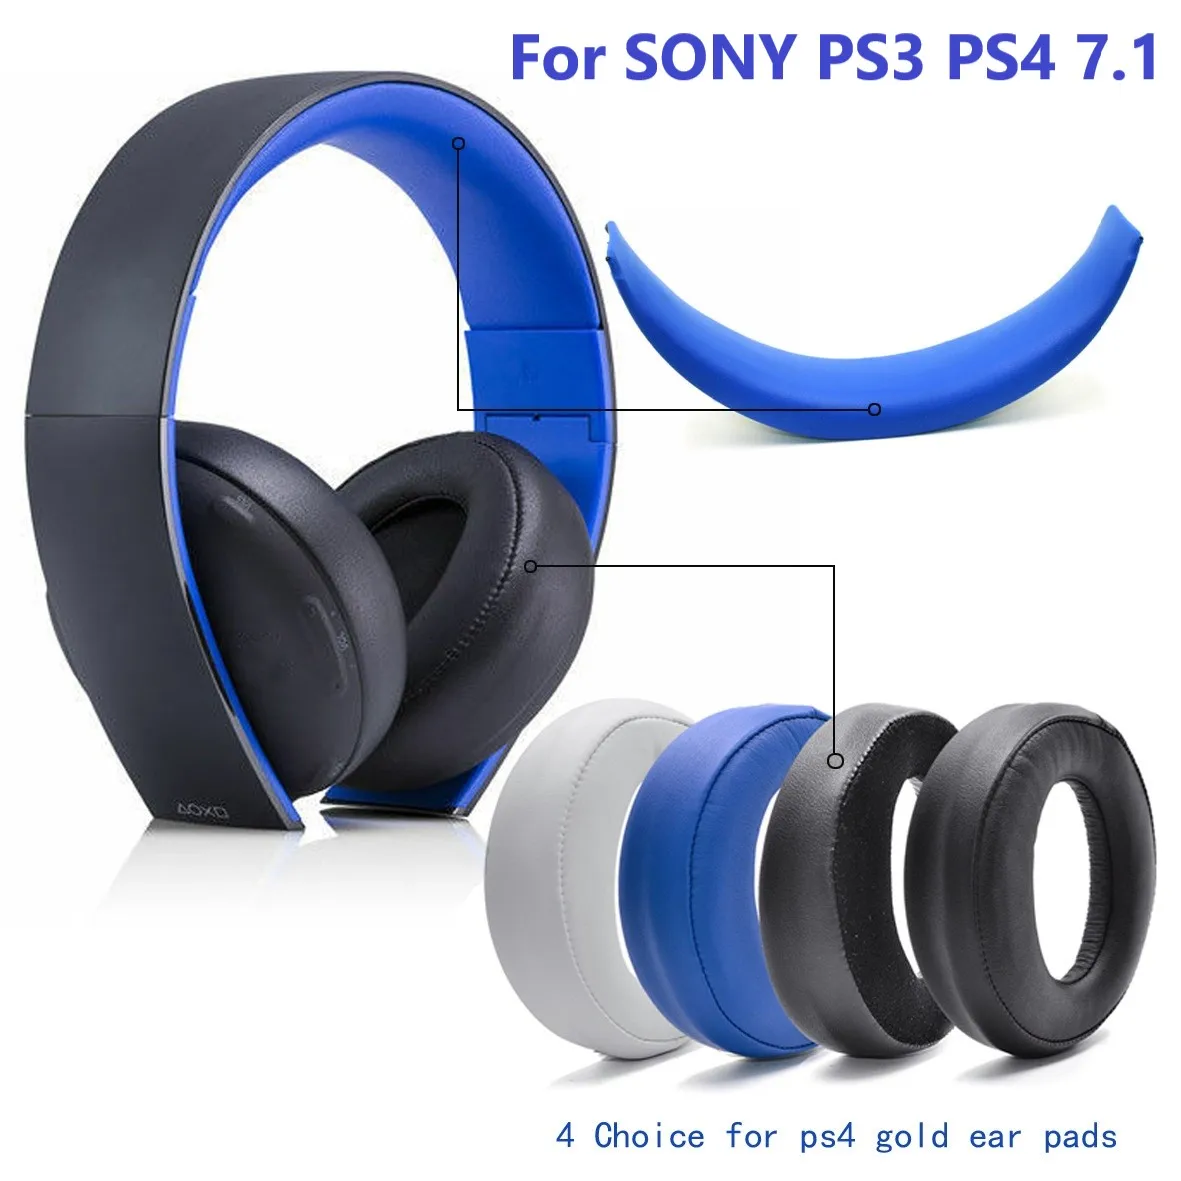 

Earpads Cushion Headband Pads Cover for Sony PlayStation Gold Wireless CECHYA-0083 Stereo 7.1 Headphone for SONY PS3 PS4 7.1